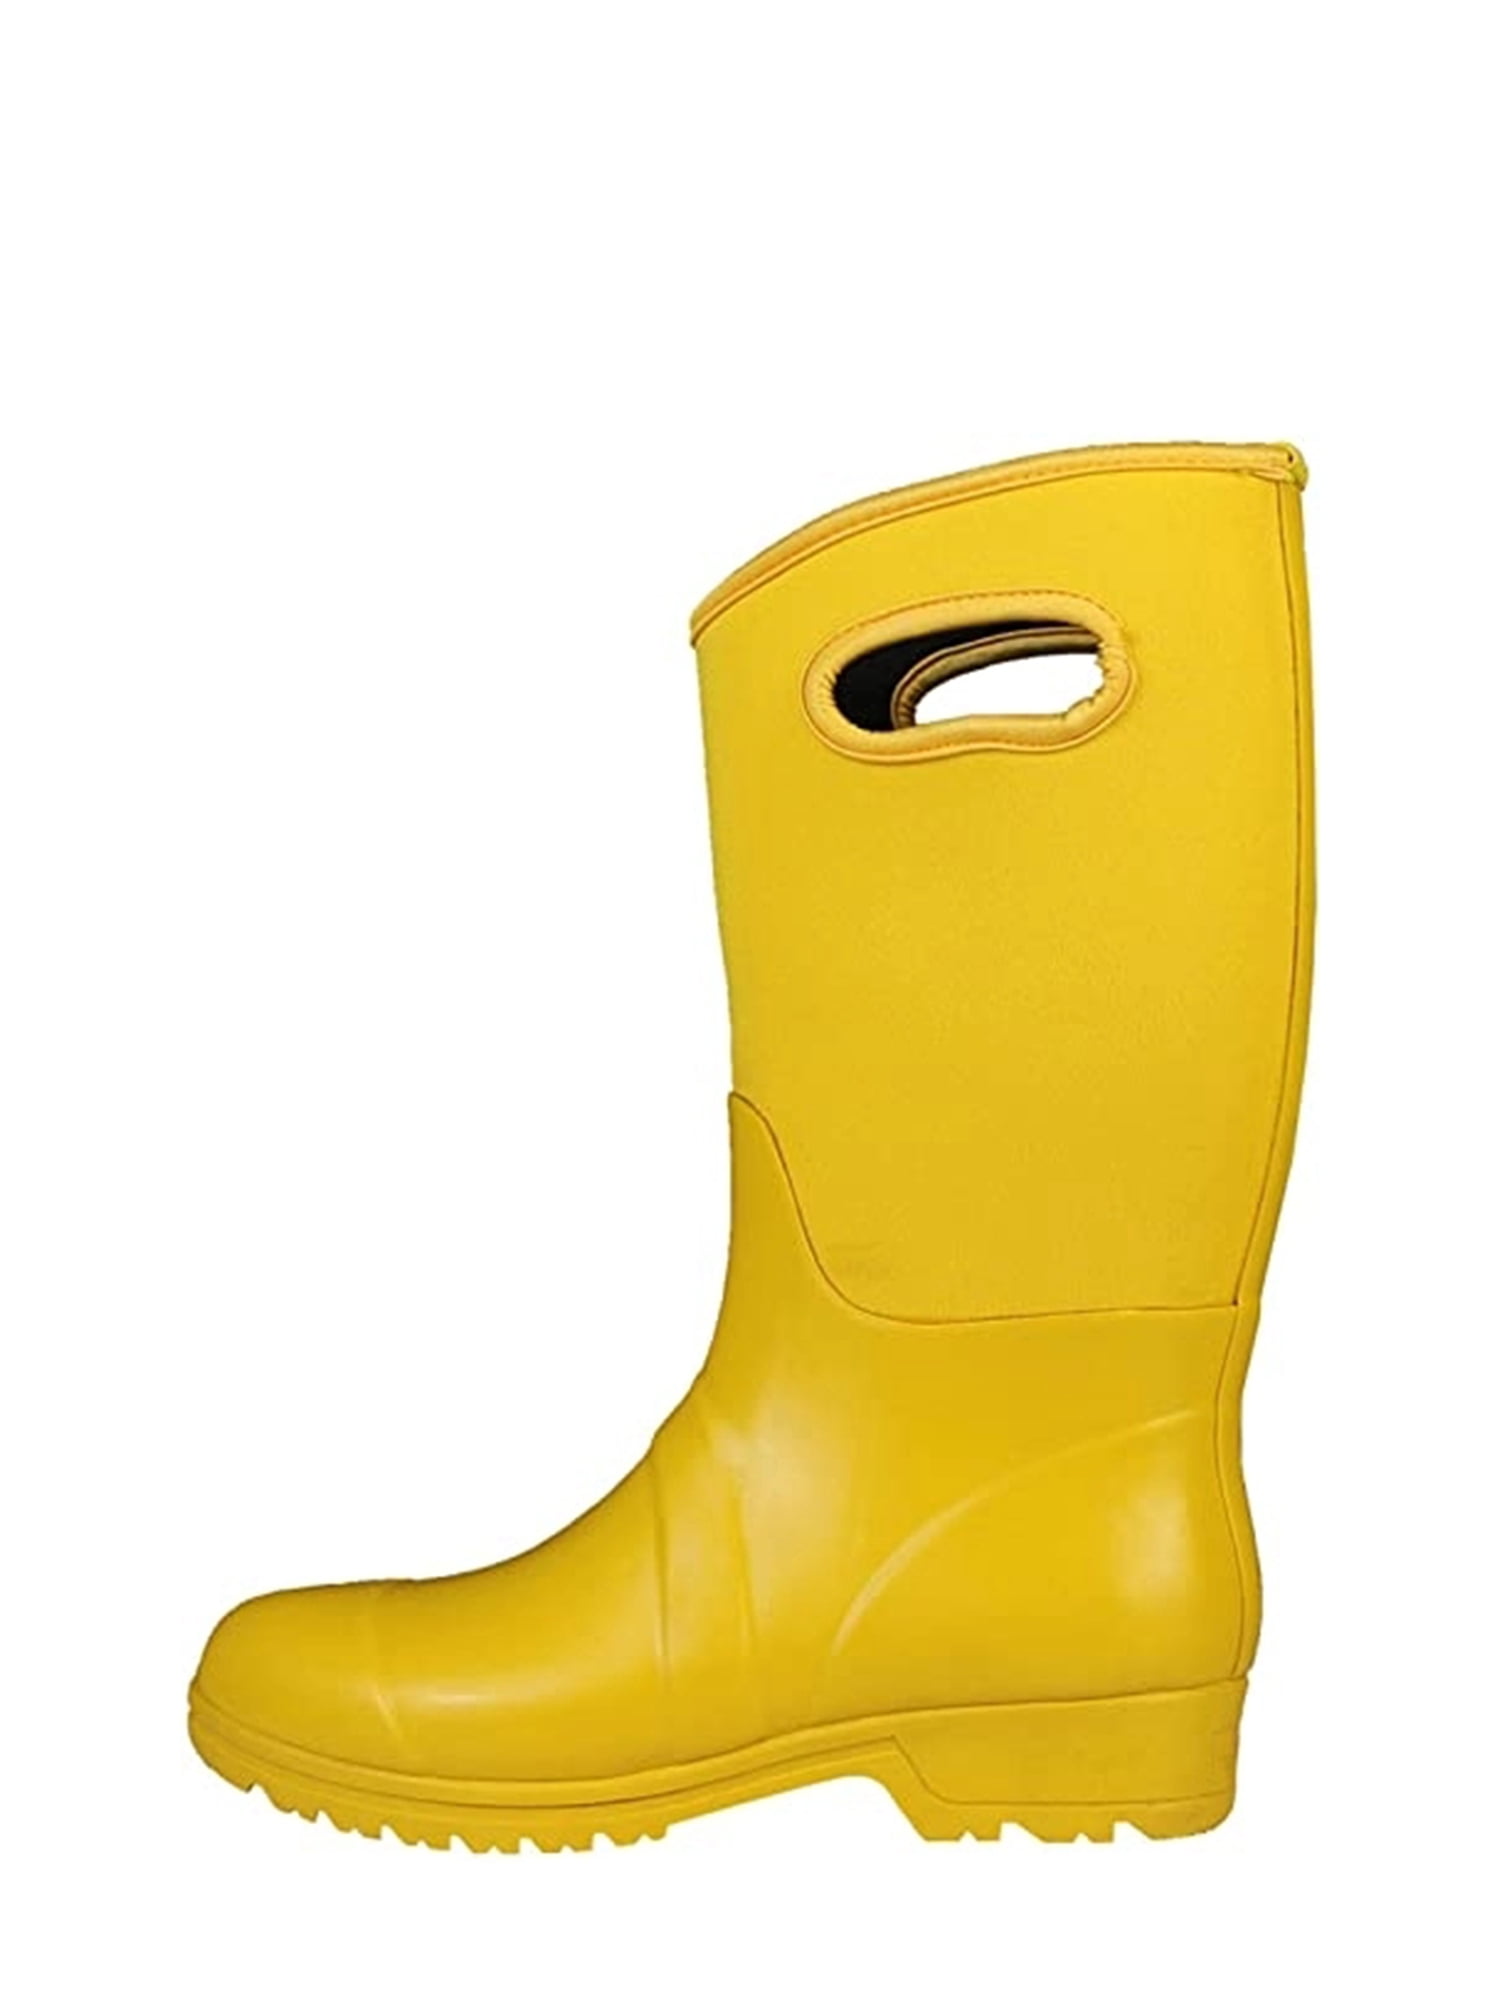 insulated water boots